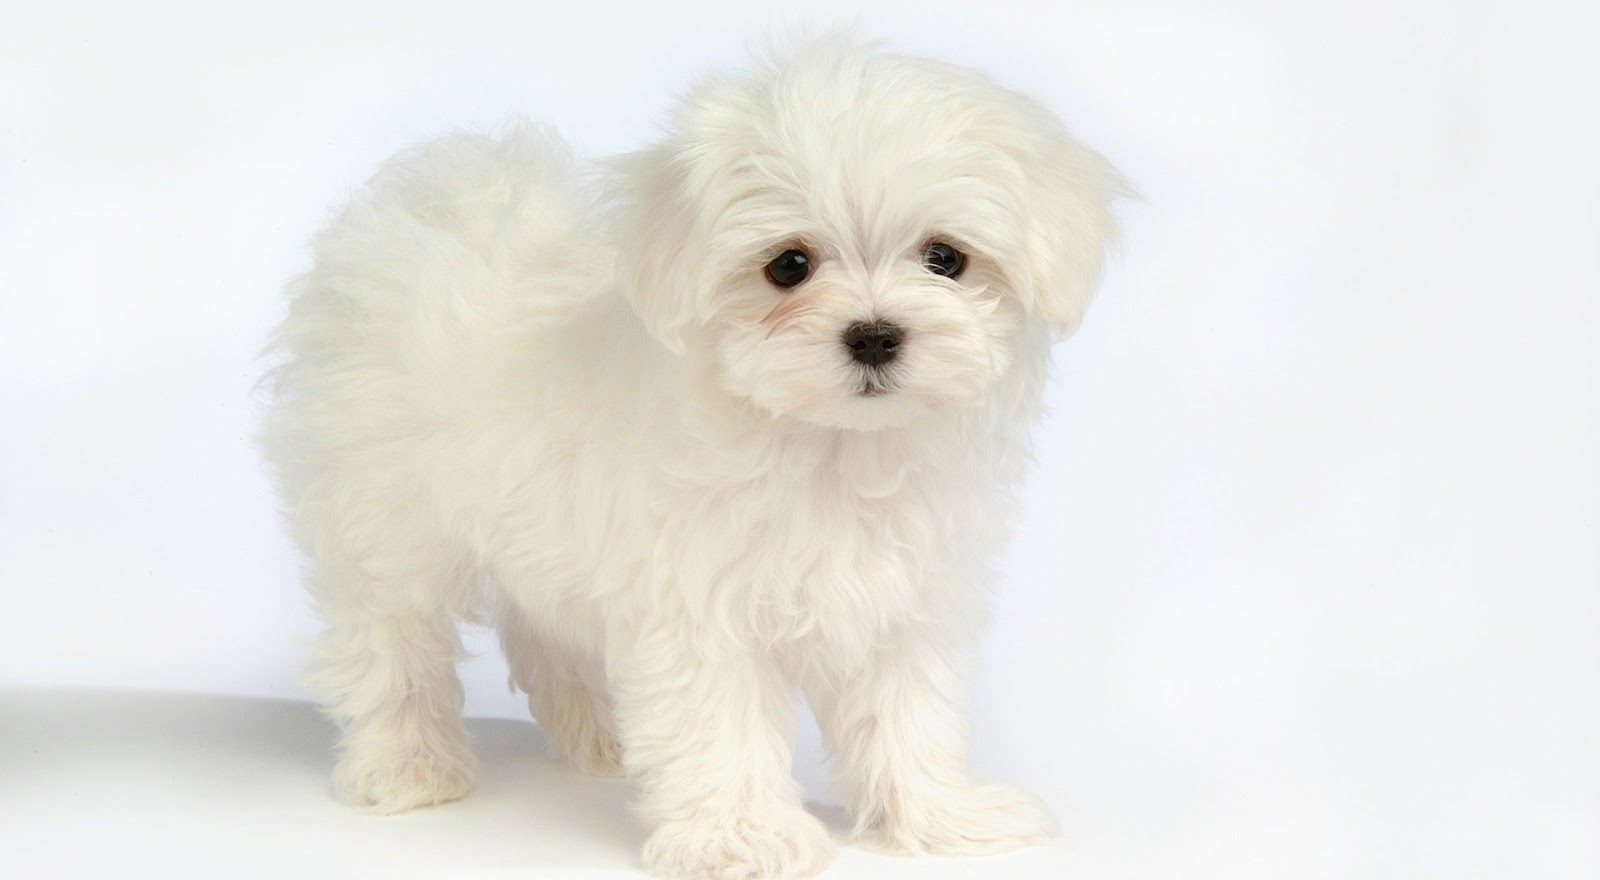 Cute White Puppies Wallpaper Collection For Your Puter And